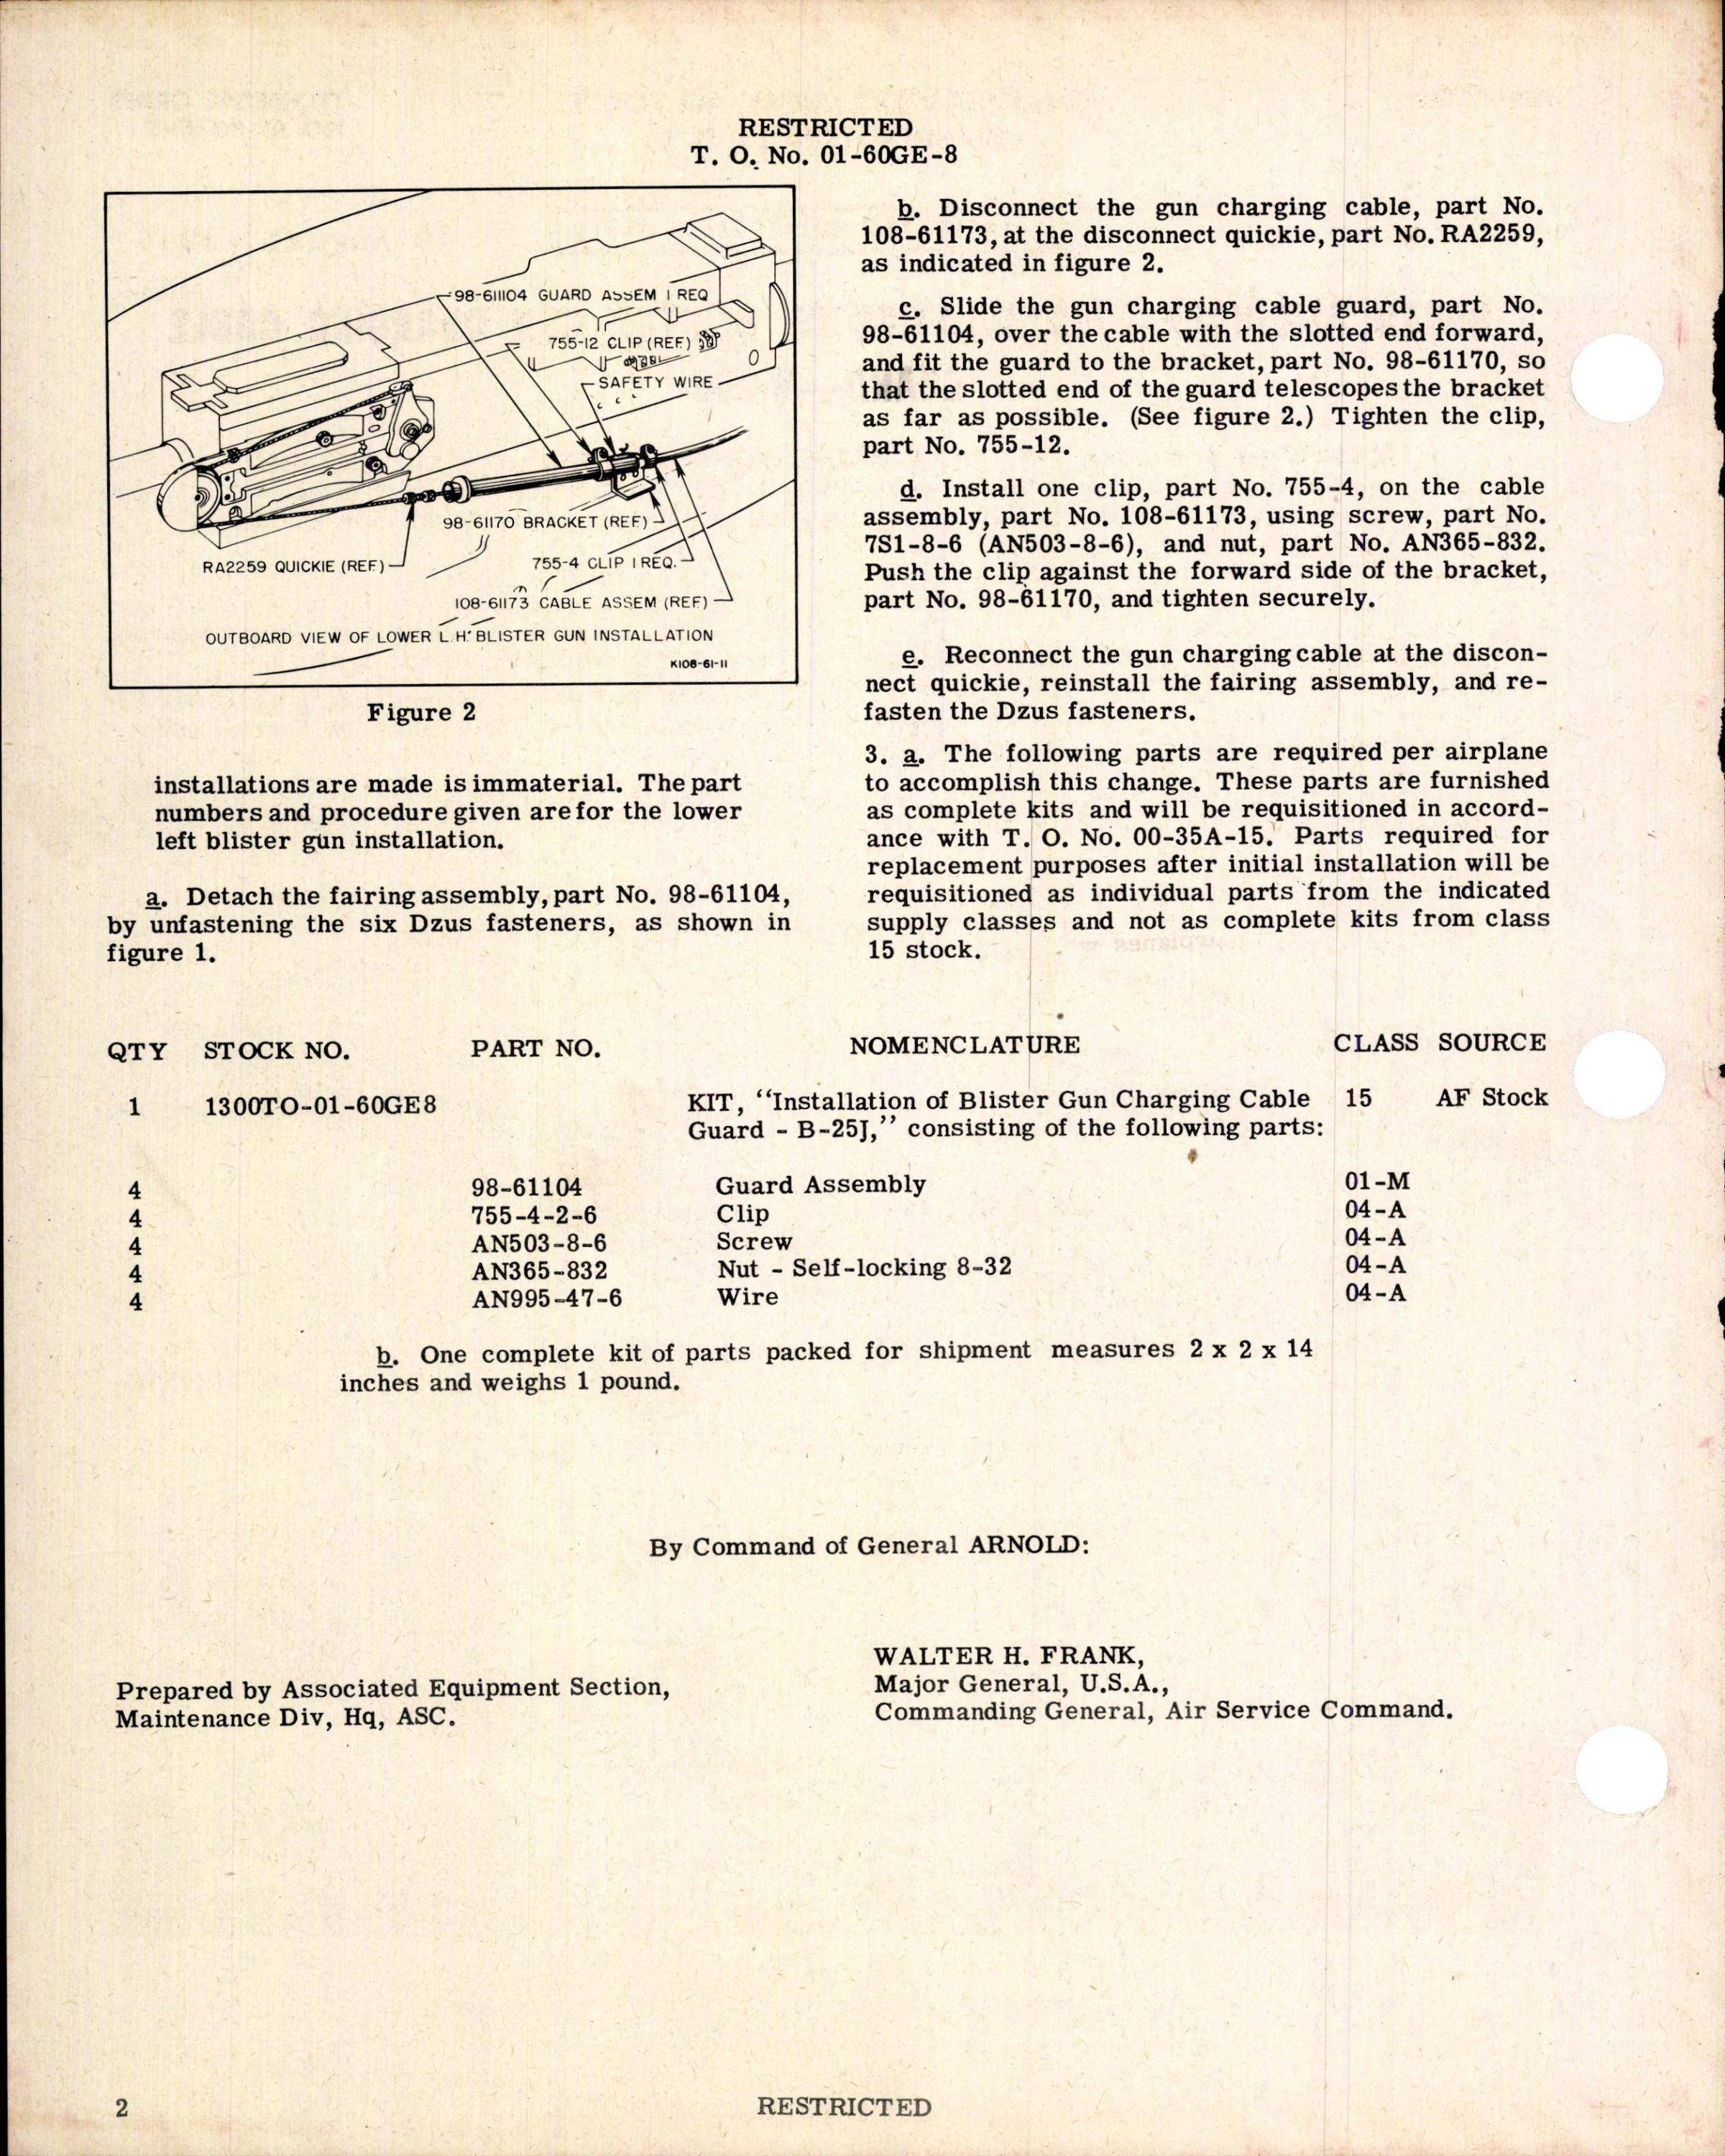 Sample page 2 from AirCorps Library document: Installation of Blister Gun Charging Cable Guard for B-25J